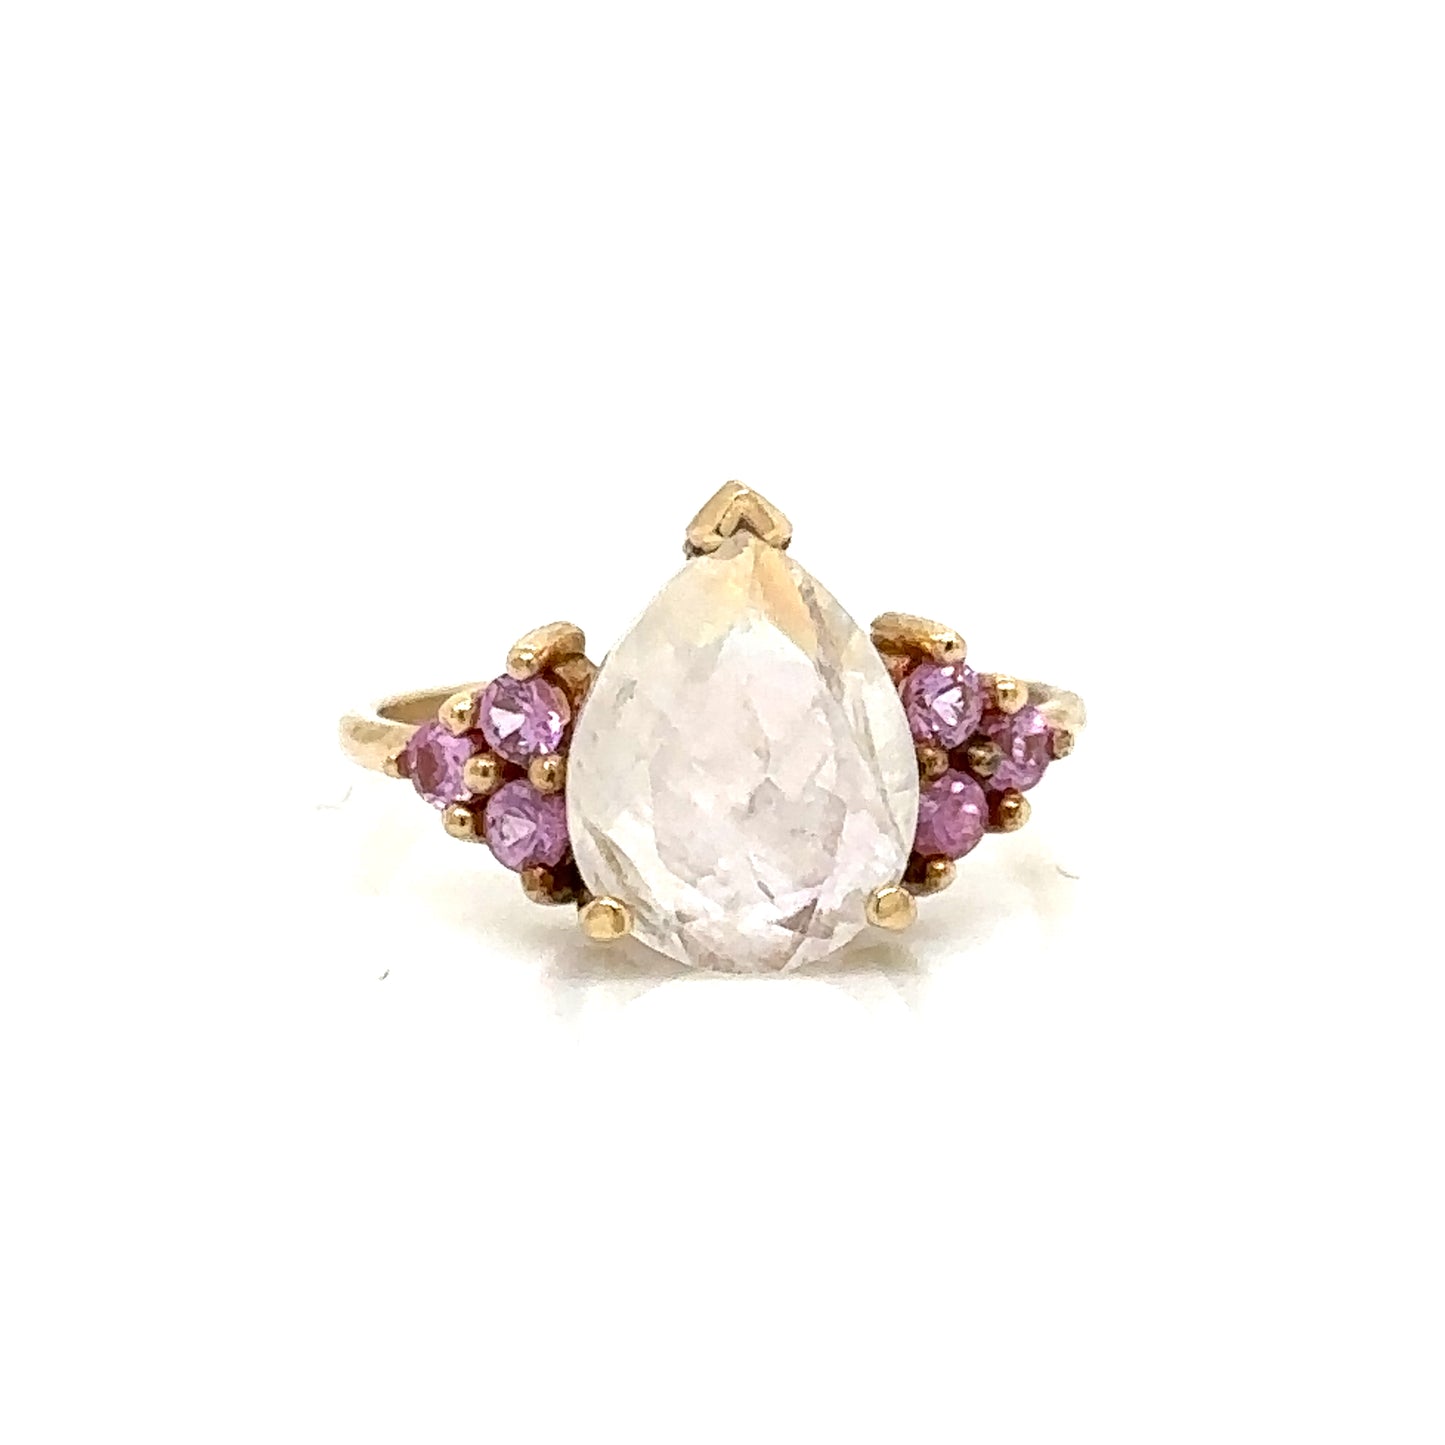 IMMEDIATE DELIVERY / Drop Moonstone Ring with Pink Sapphires / 14k Rose Gold / Size 5.75